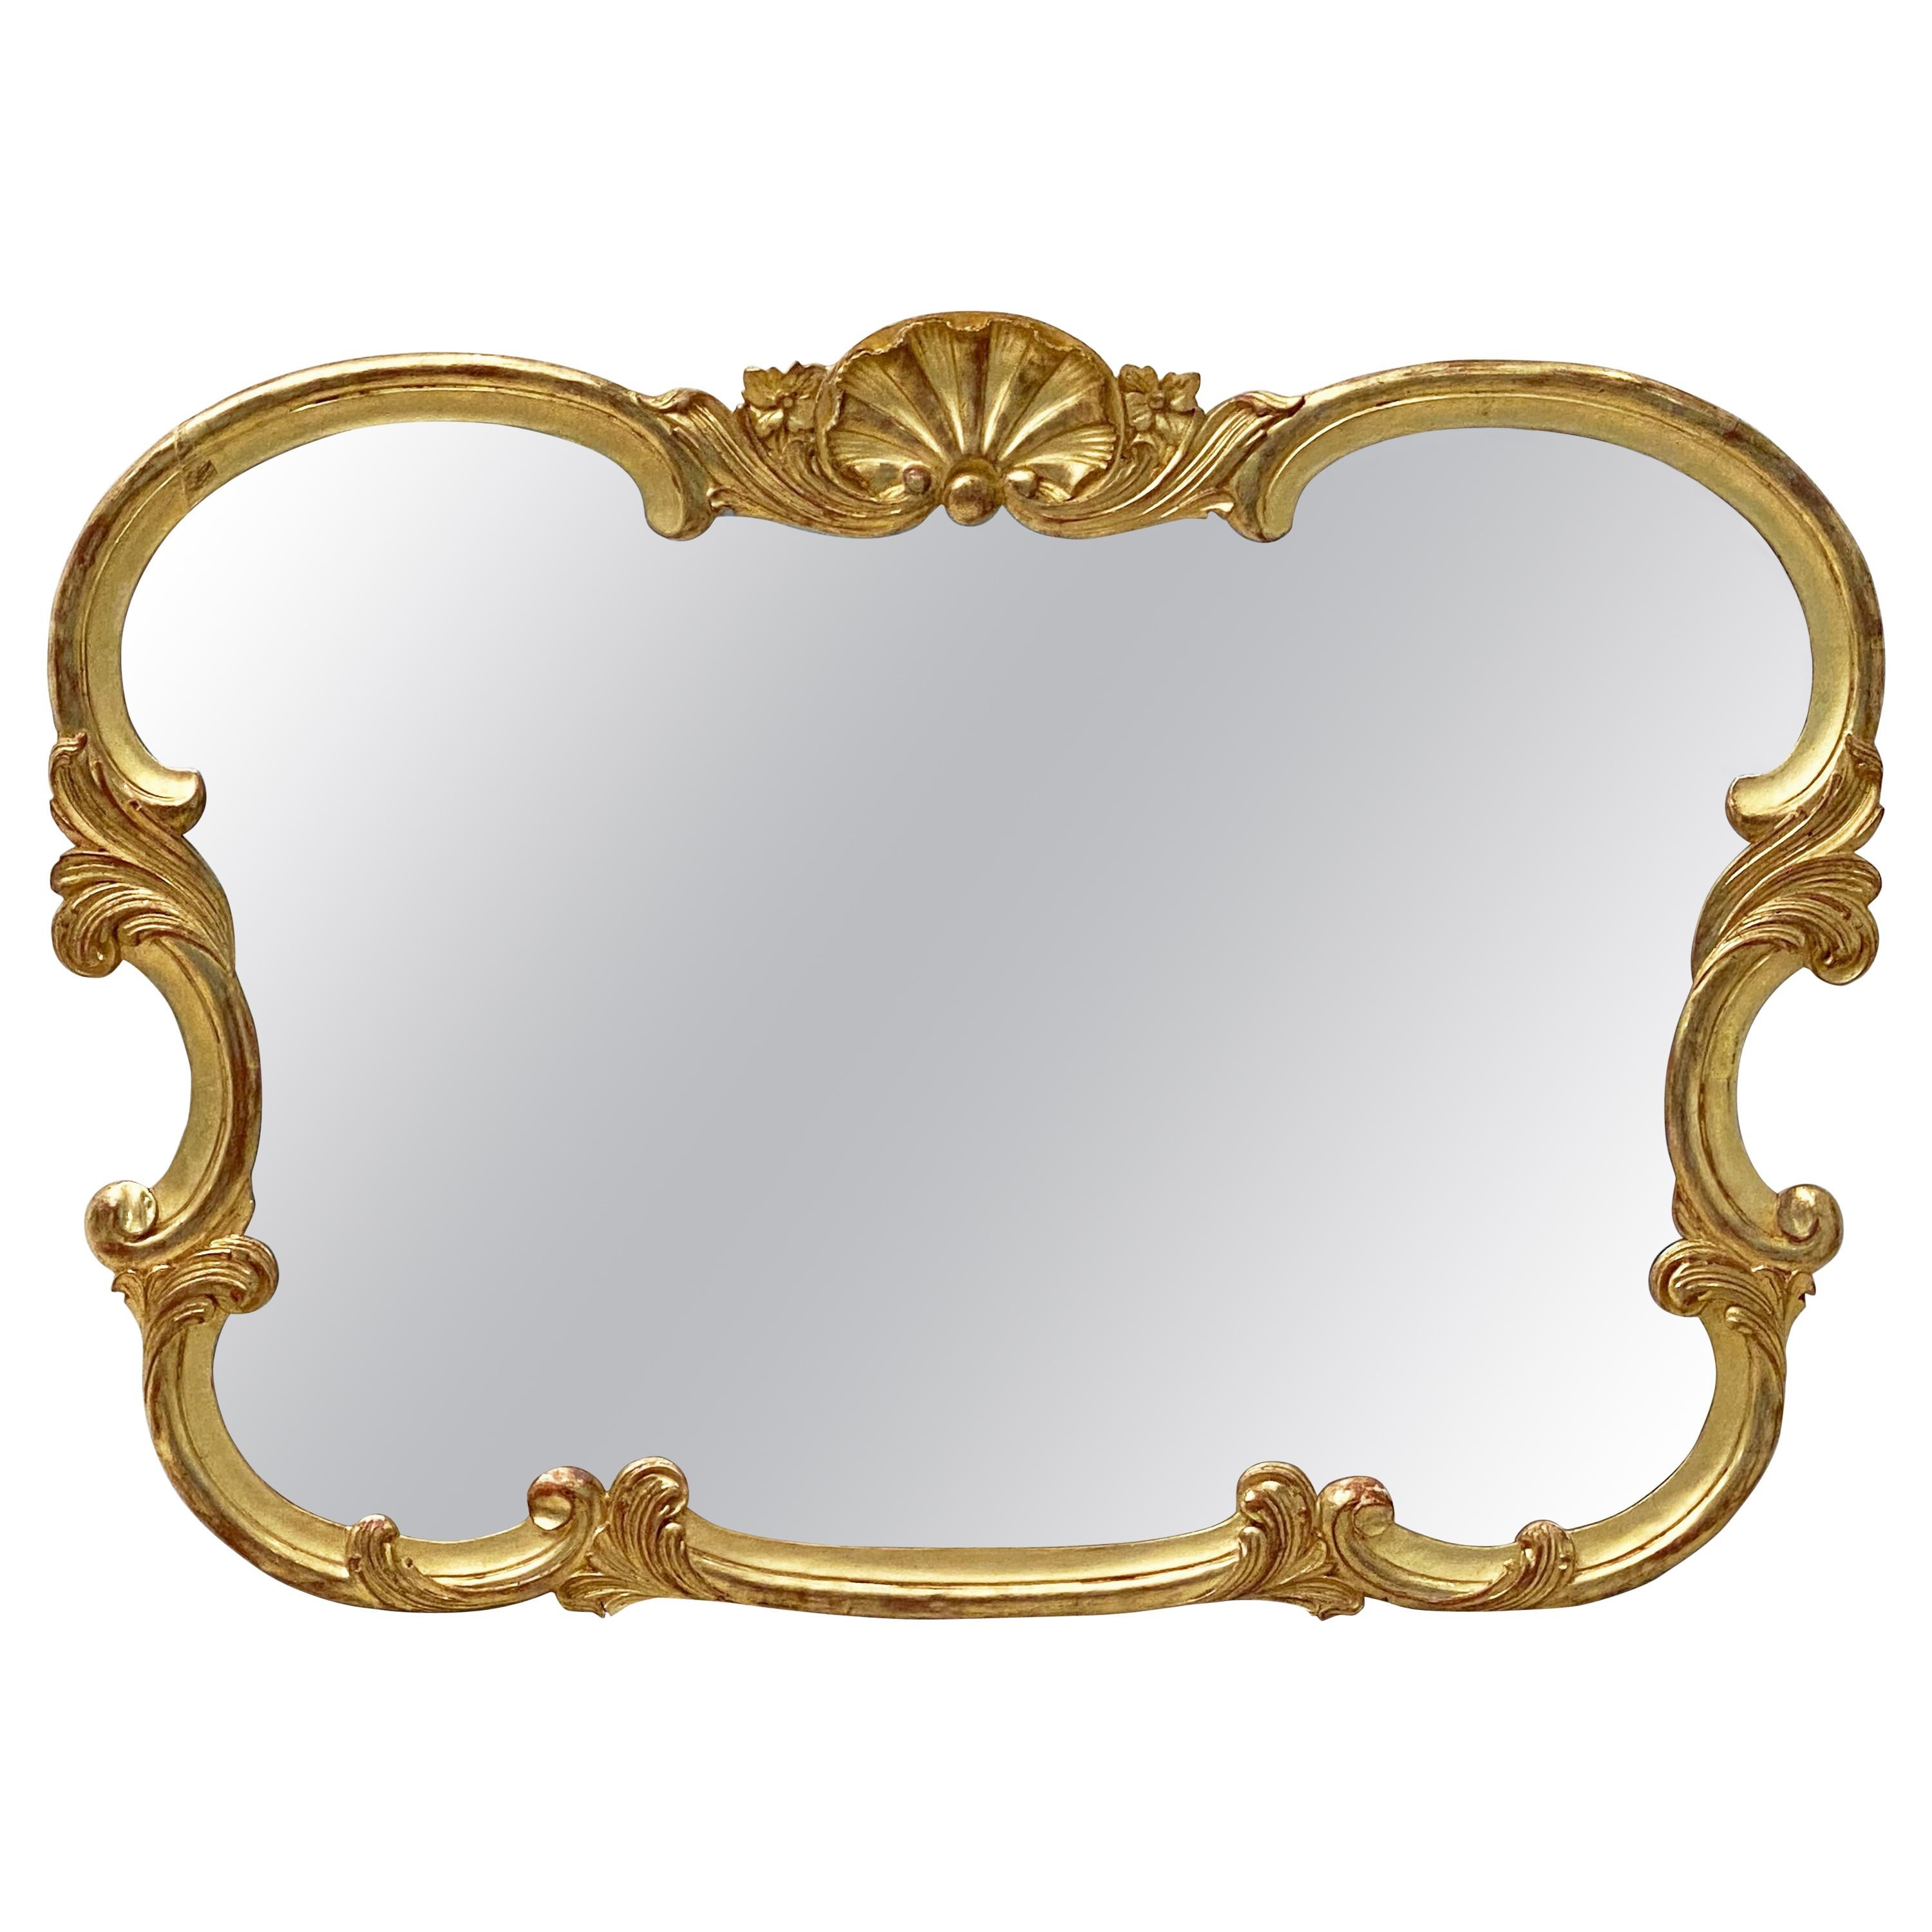 Large French Carved Gilt Frame Mirror With Seashell Crest (H 33 3/4 X W 47)